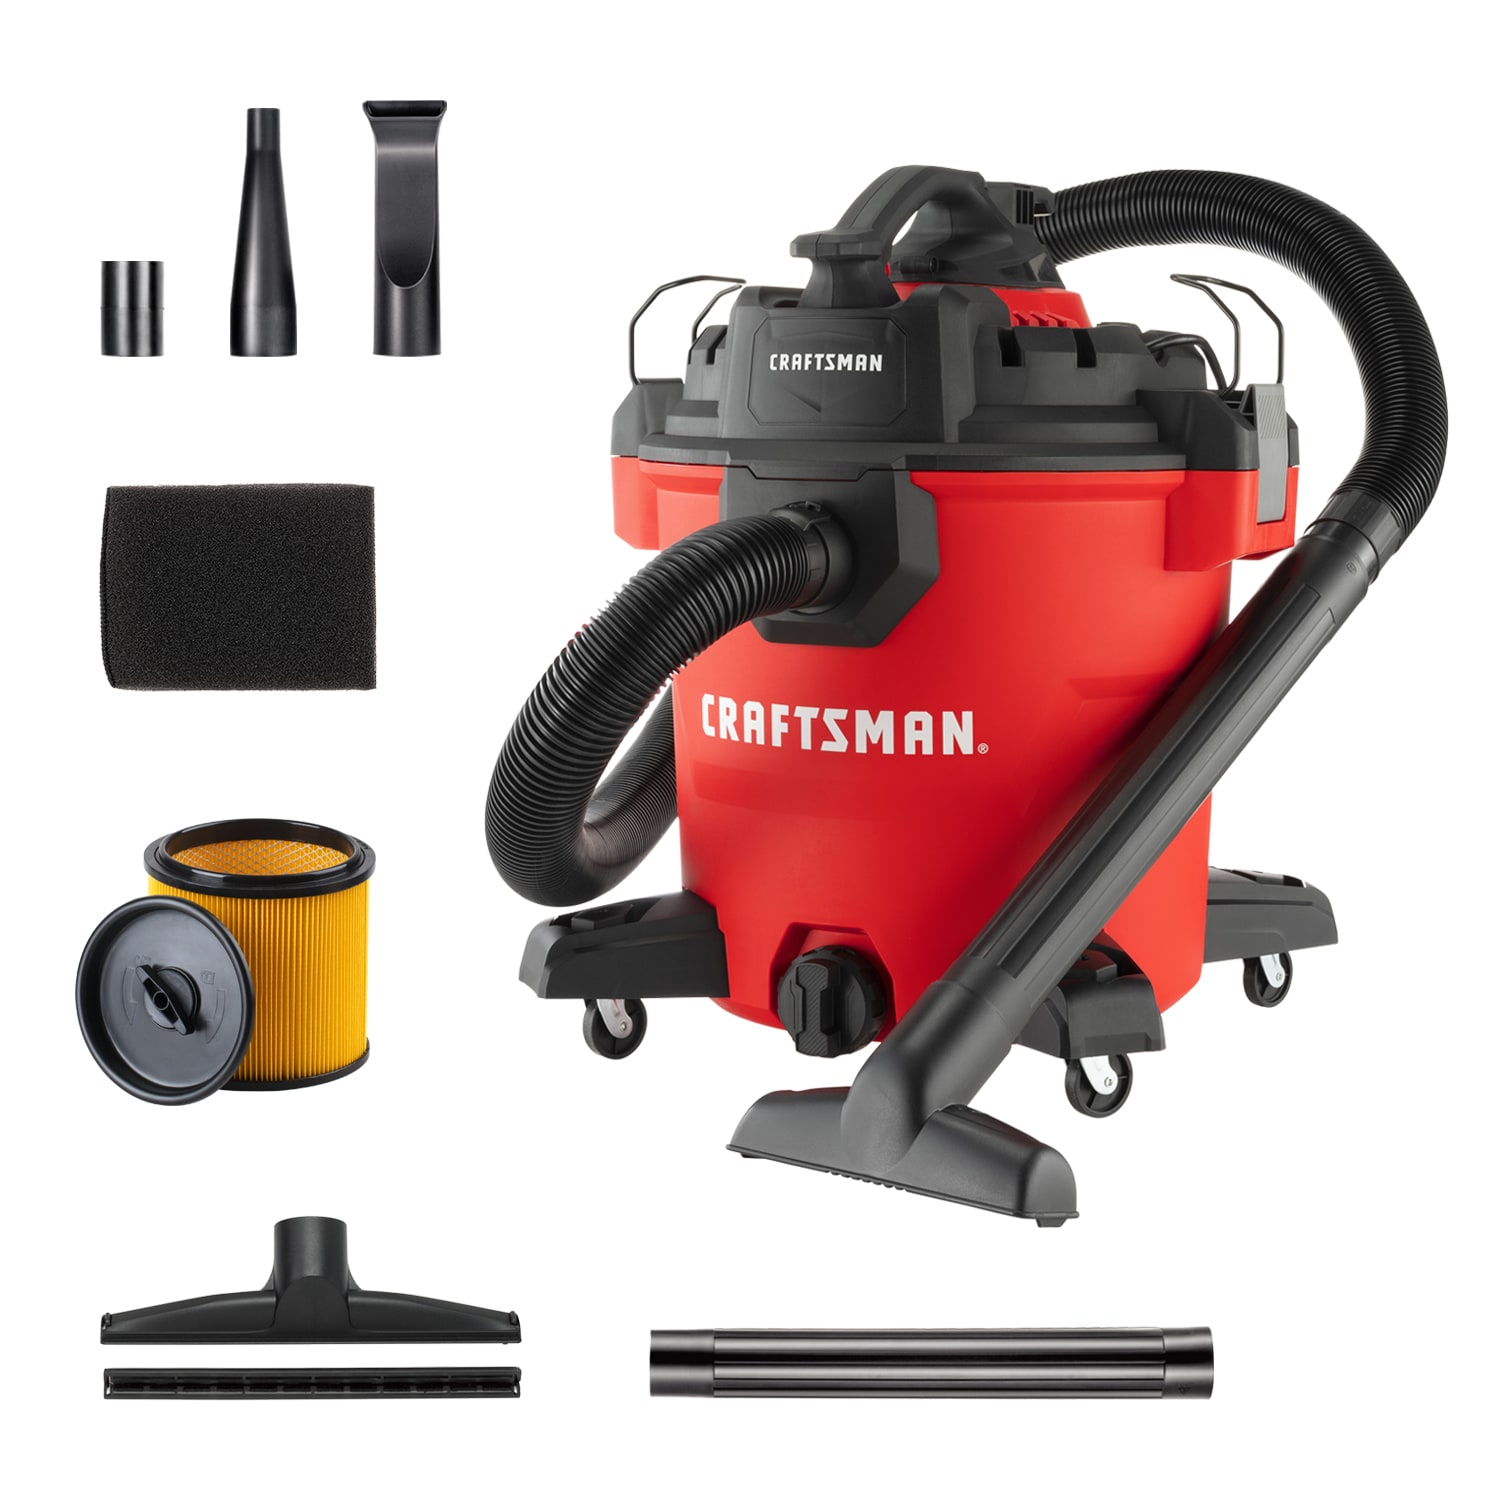 Shop vac small wet/dry blower 5gal 3hp rentals Spartanburg SC  Where to  rent shop vac small wet/dry blower 5gal 3hp in Greenville SC, Spartanburg,  Gaffney, Simpsonville, Easley South Carolina